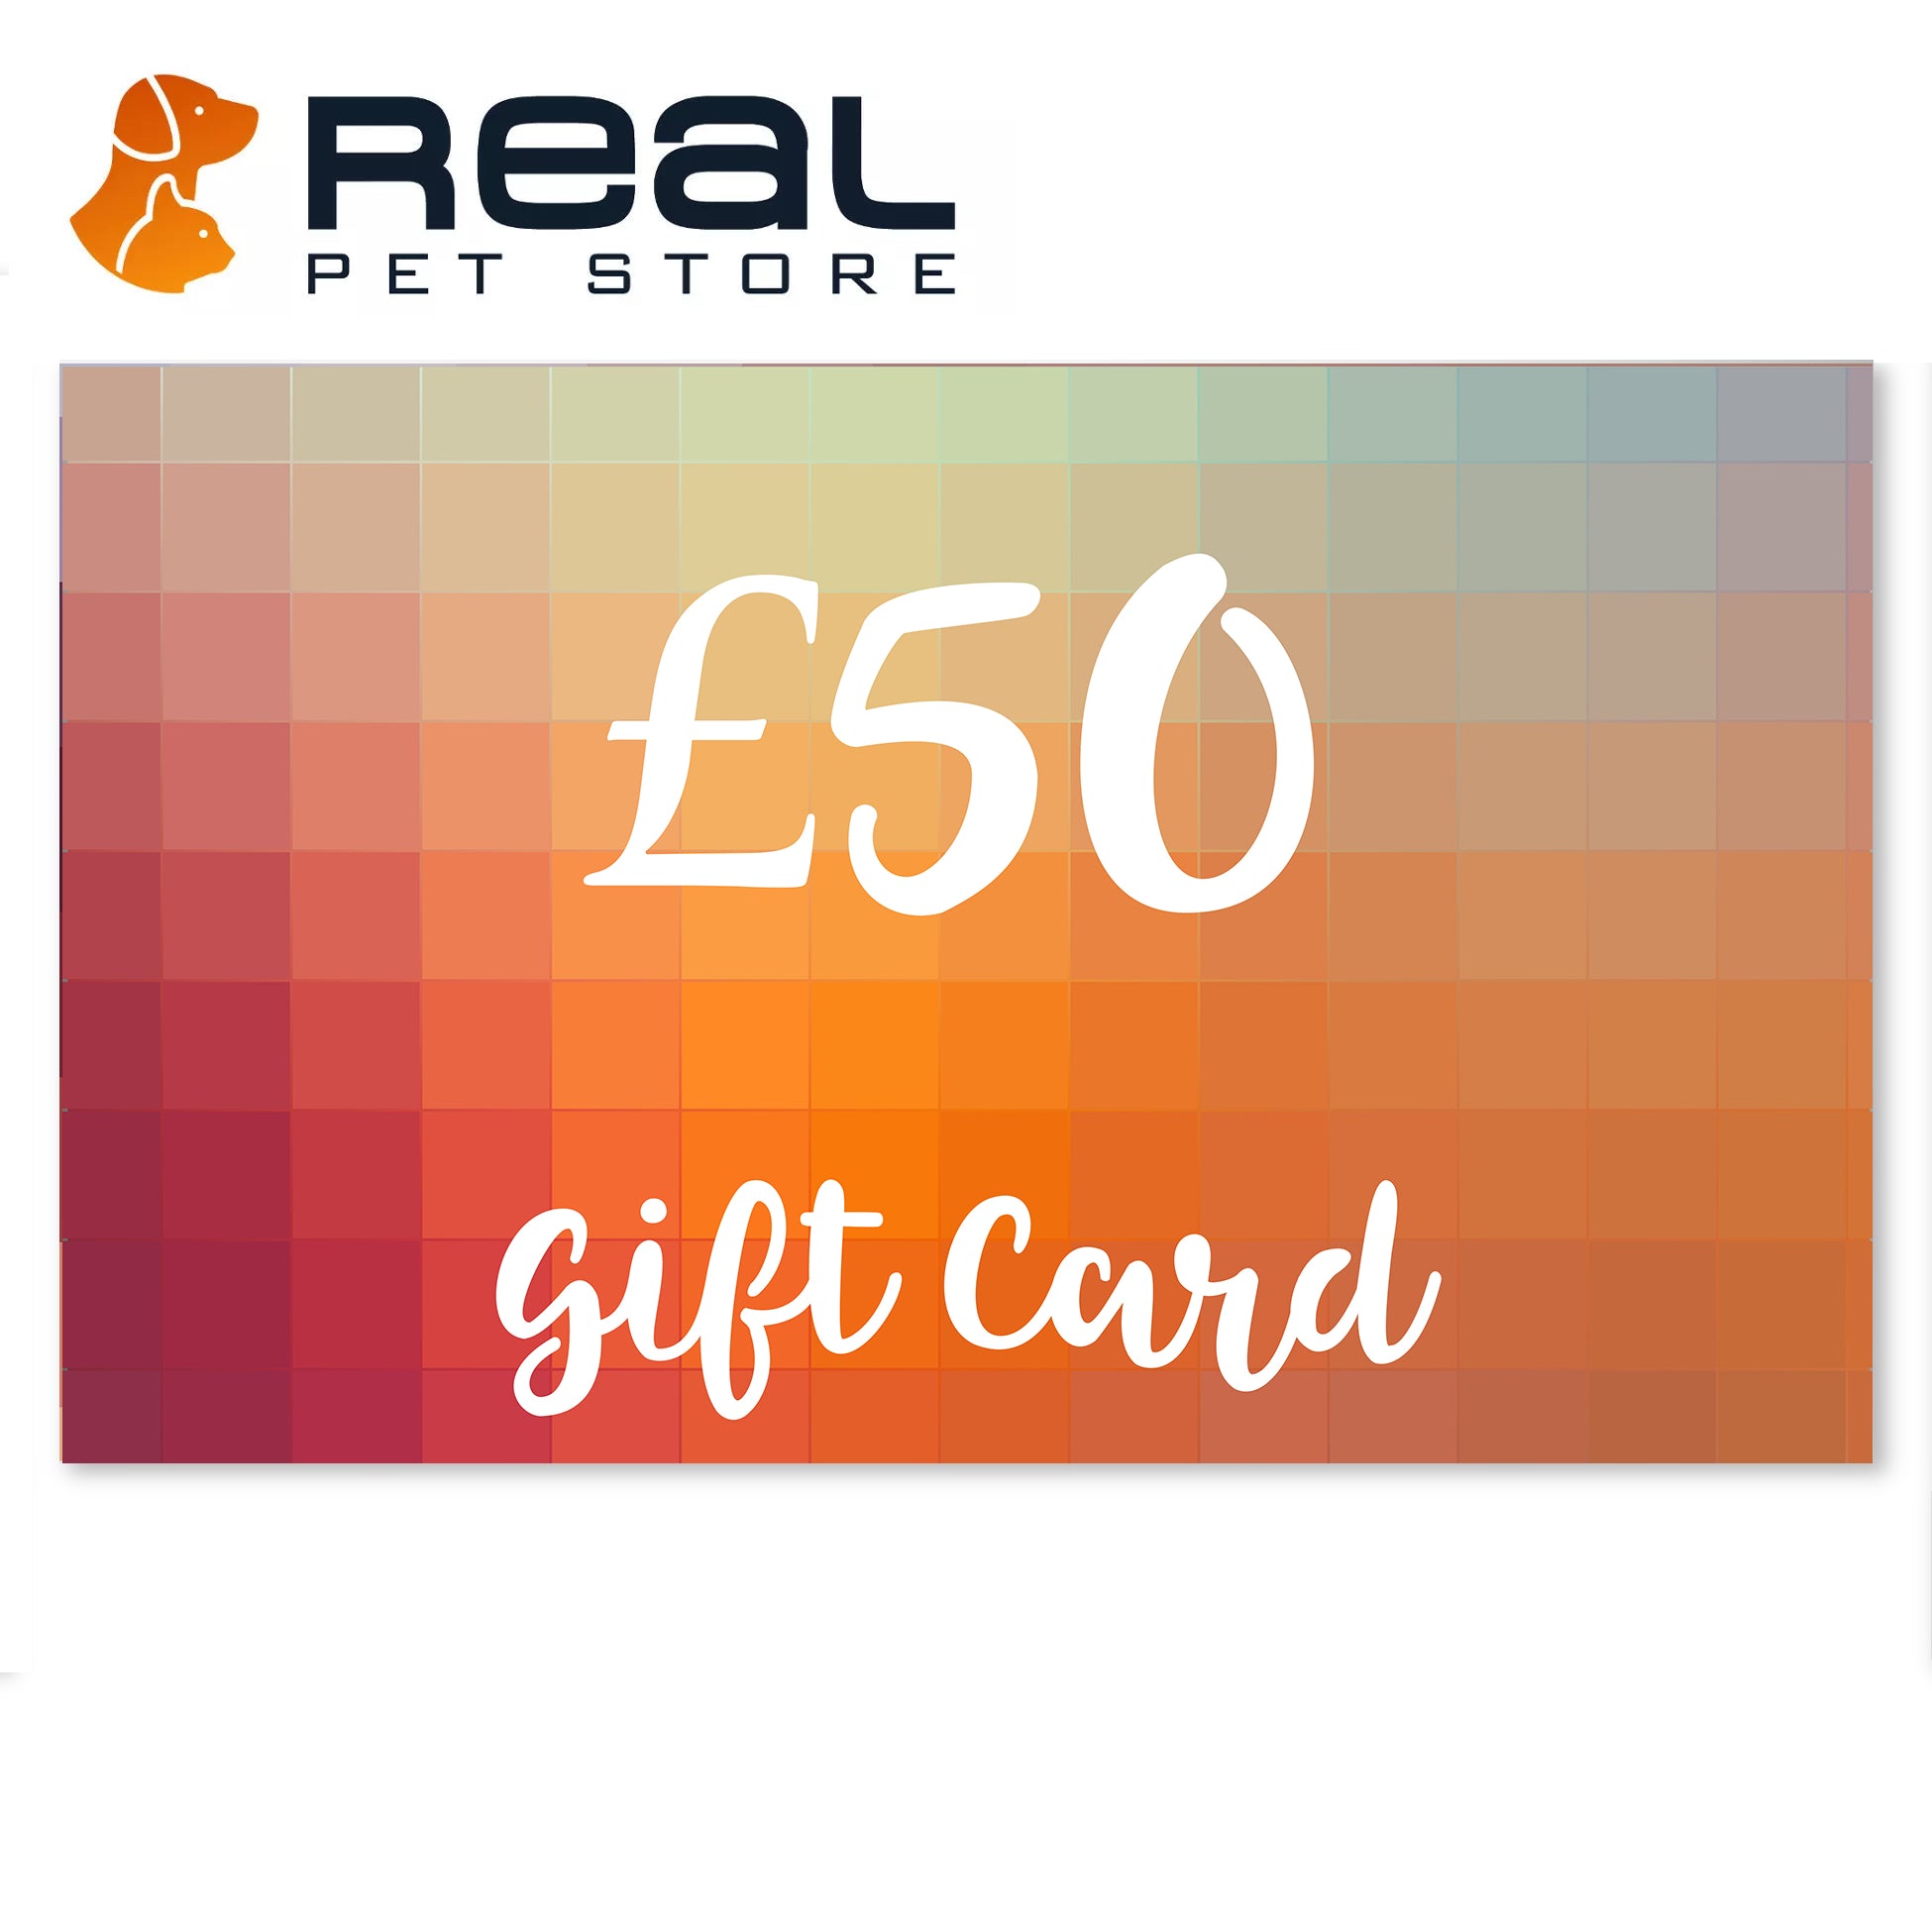 Real Pet Store Gift Card £50 - Real Pets